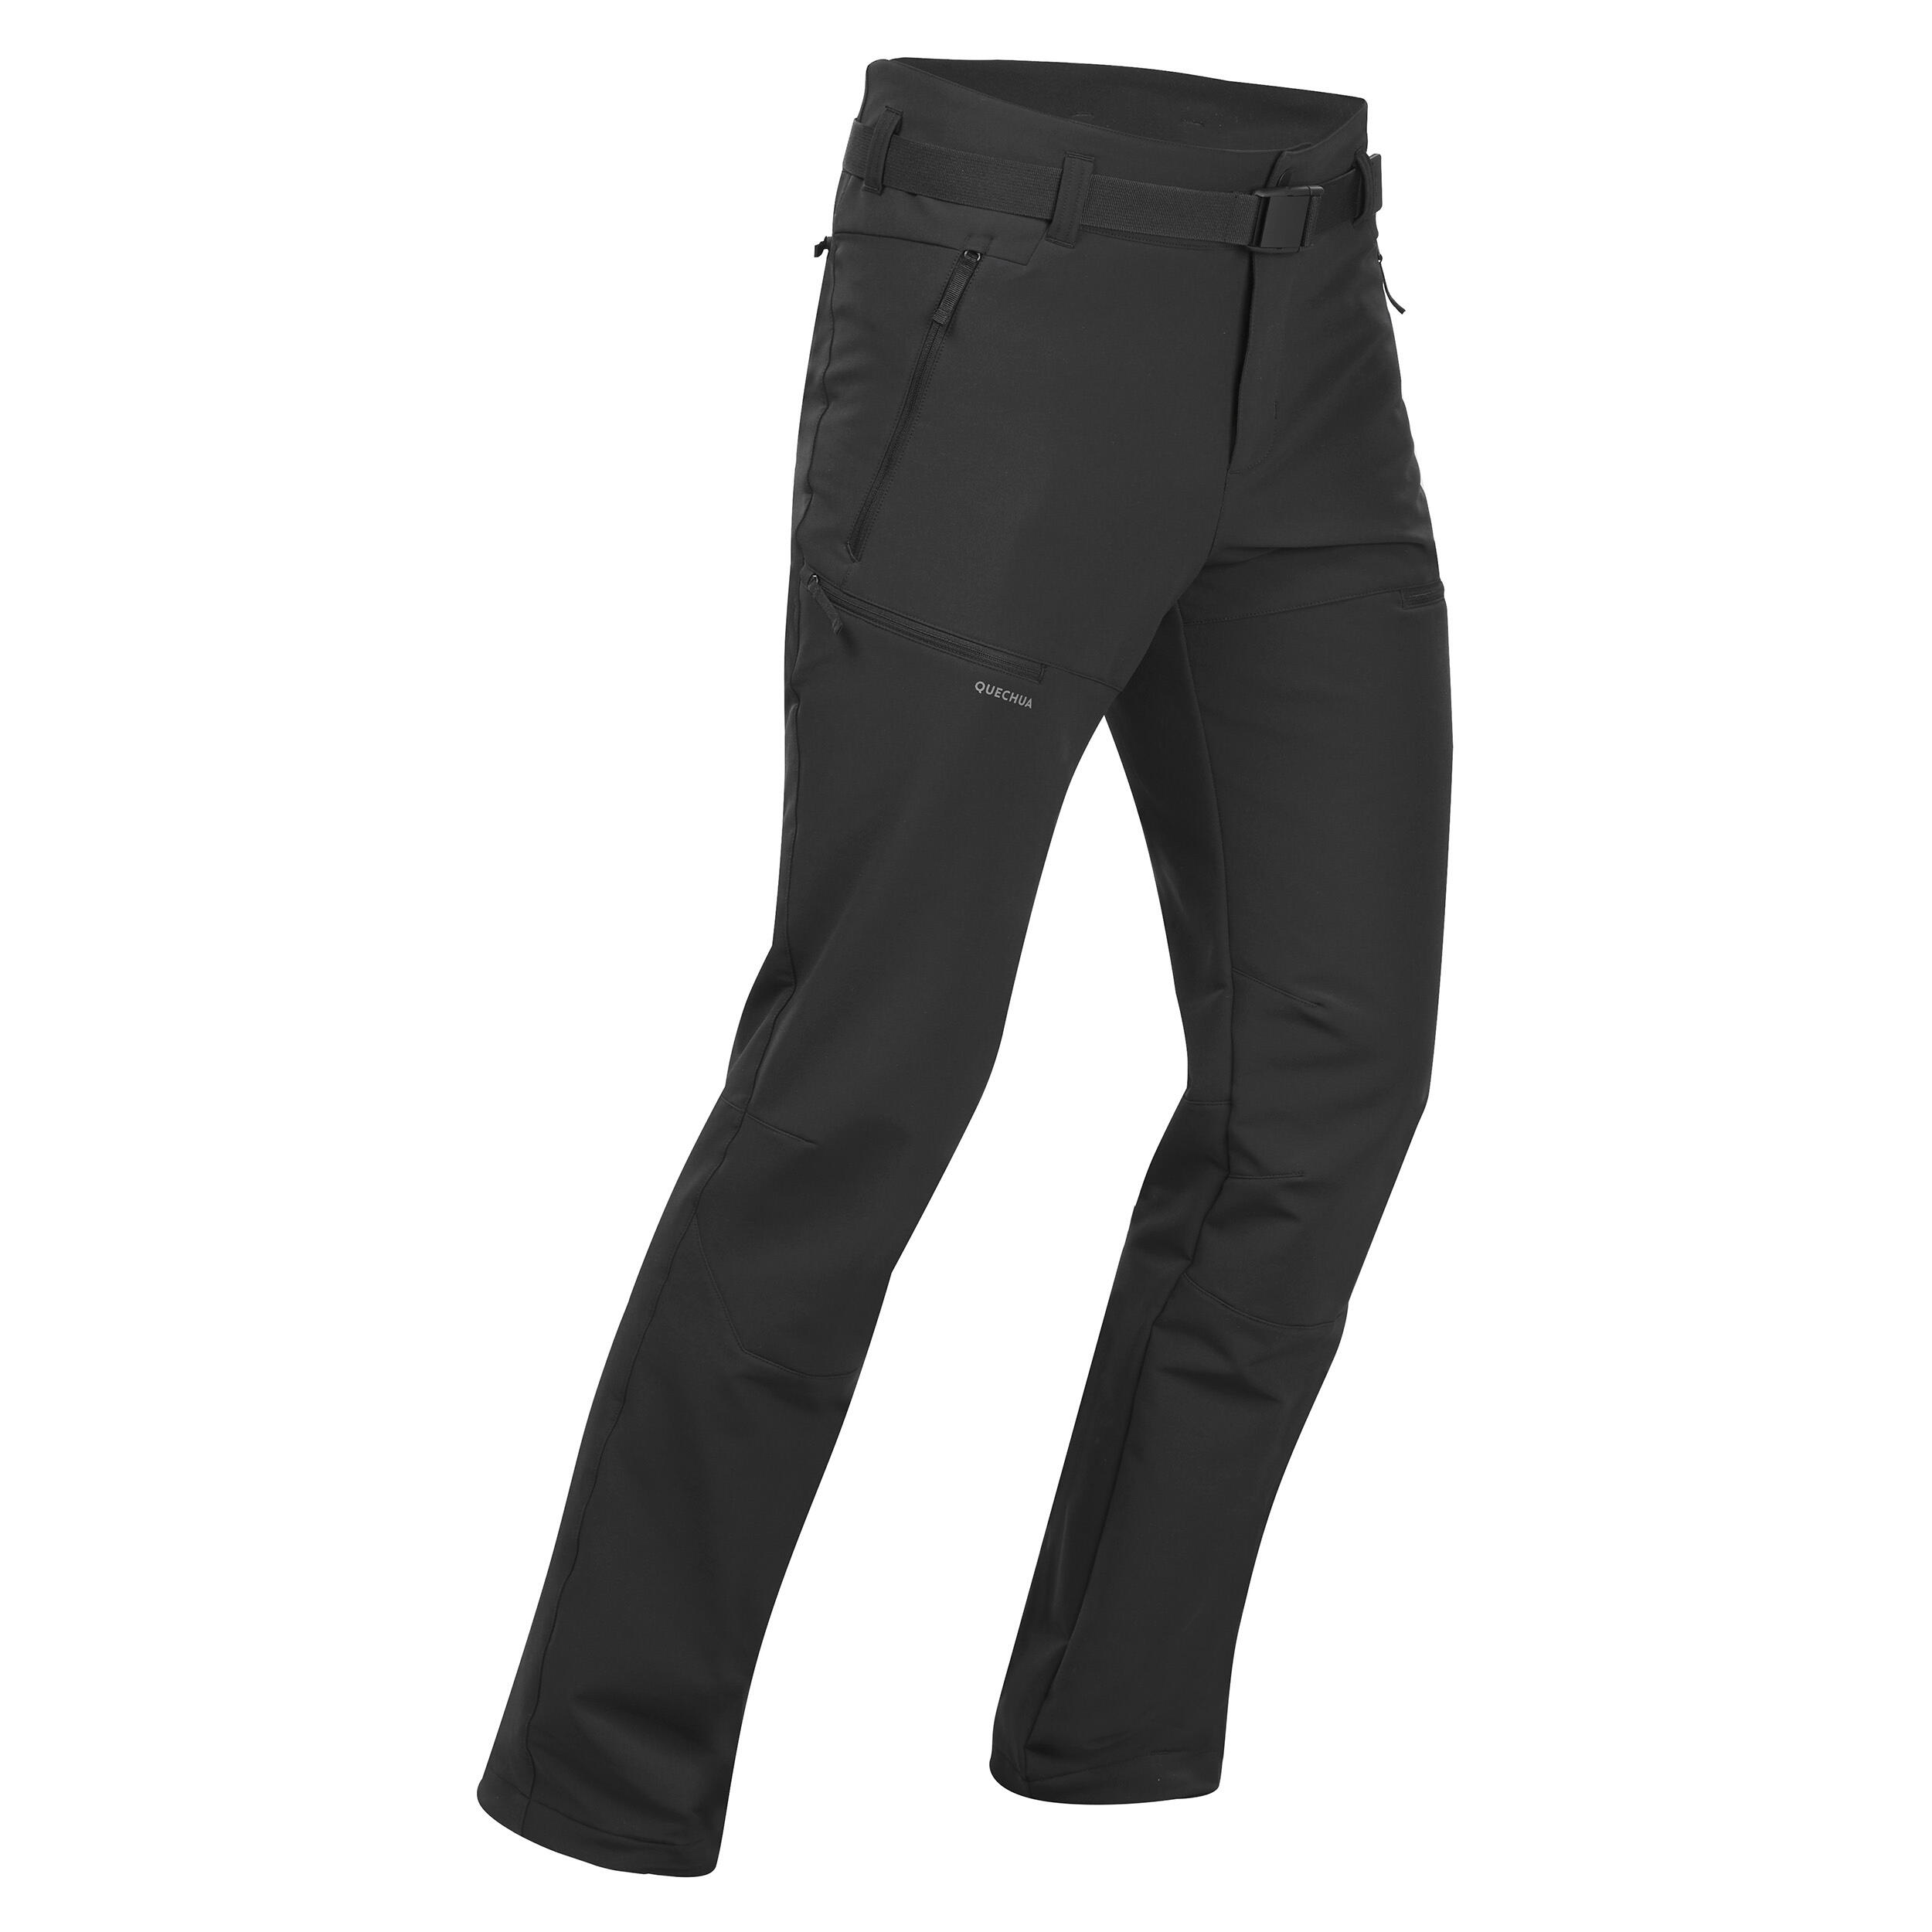 City Cycling Rain OverPants with Built-In Overshoes 100 - Black | Decathlon